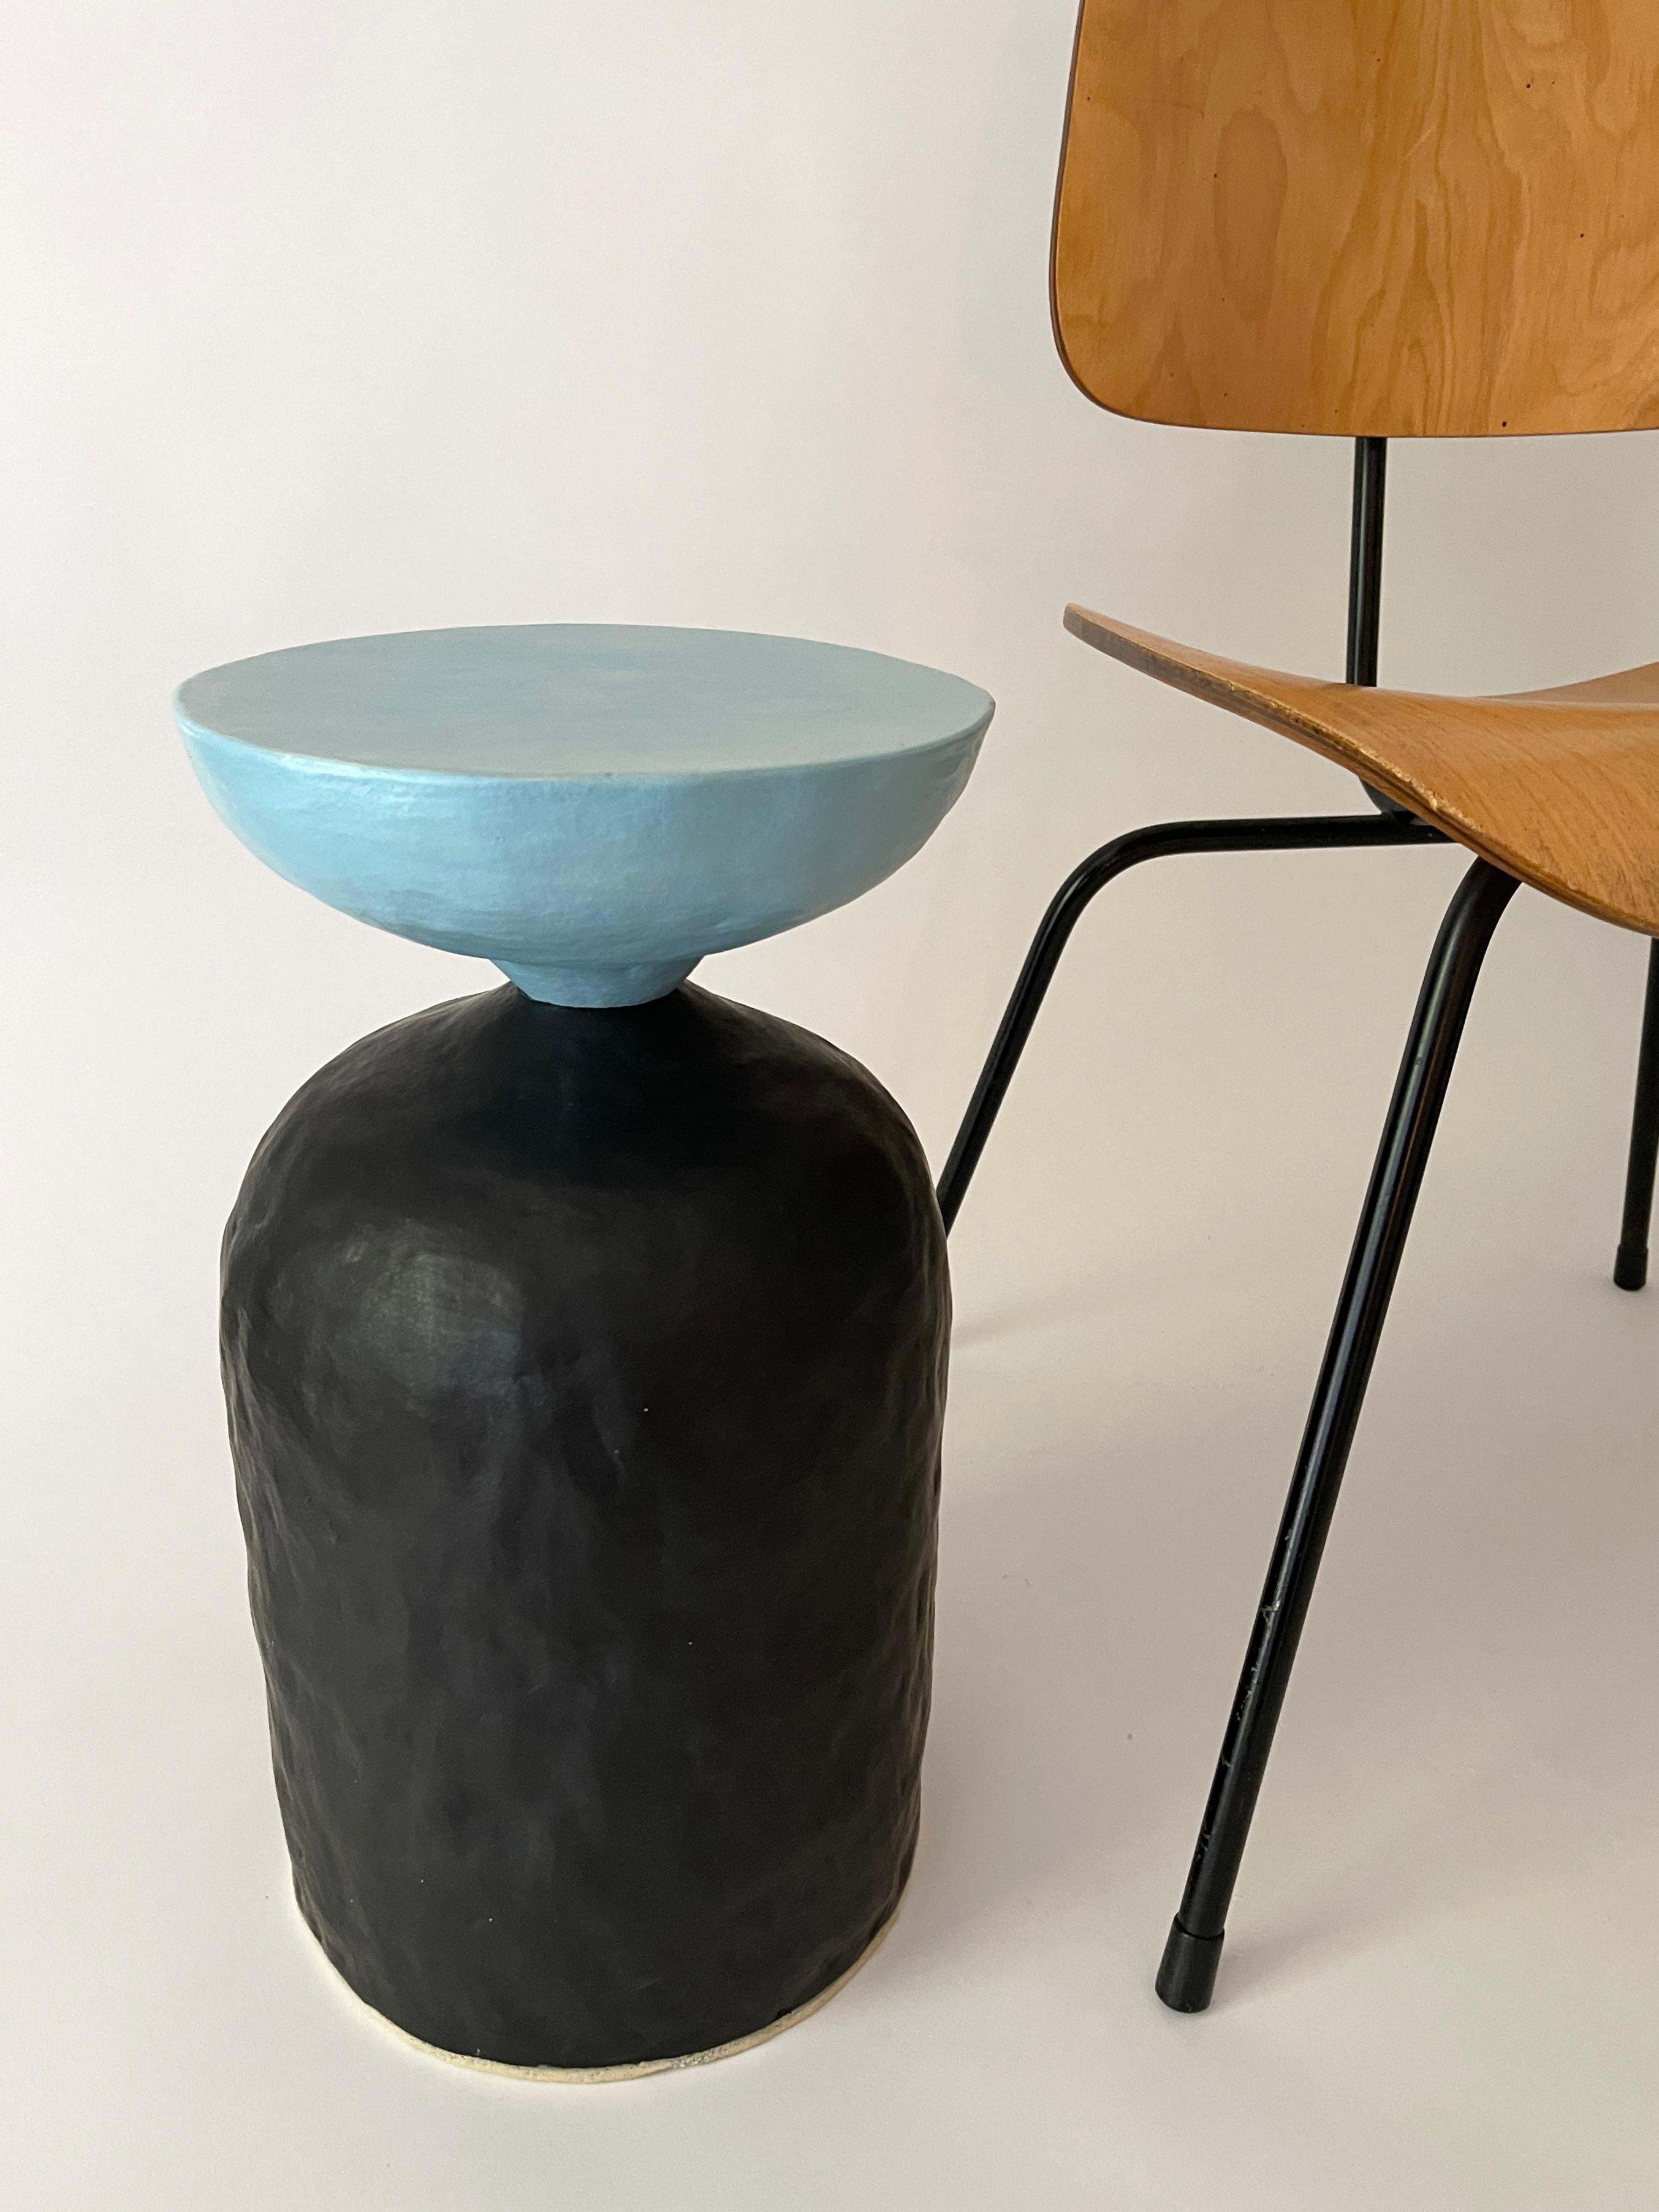 Tom side table by Meg Morrison
Materials: Ceramic.
One of a kind.
Dimensions: D 25.5 x H 43.2 cm.

All sizes are approximate. Please contact us.

Meg Morrison is an artist in Richmond, Virginia currently working in ceramics. Meg holds an MFA in